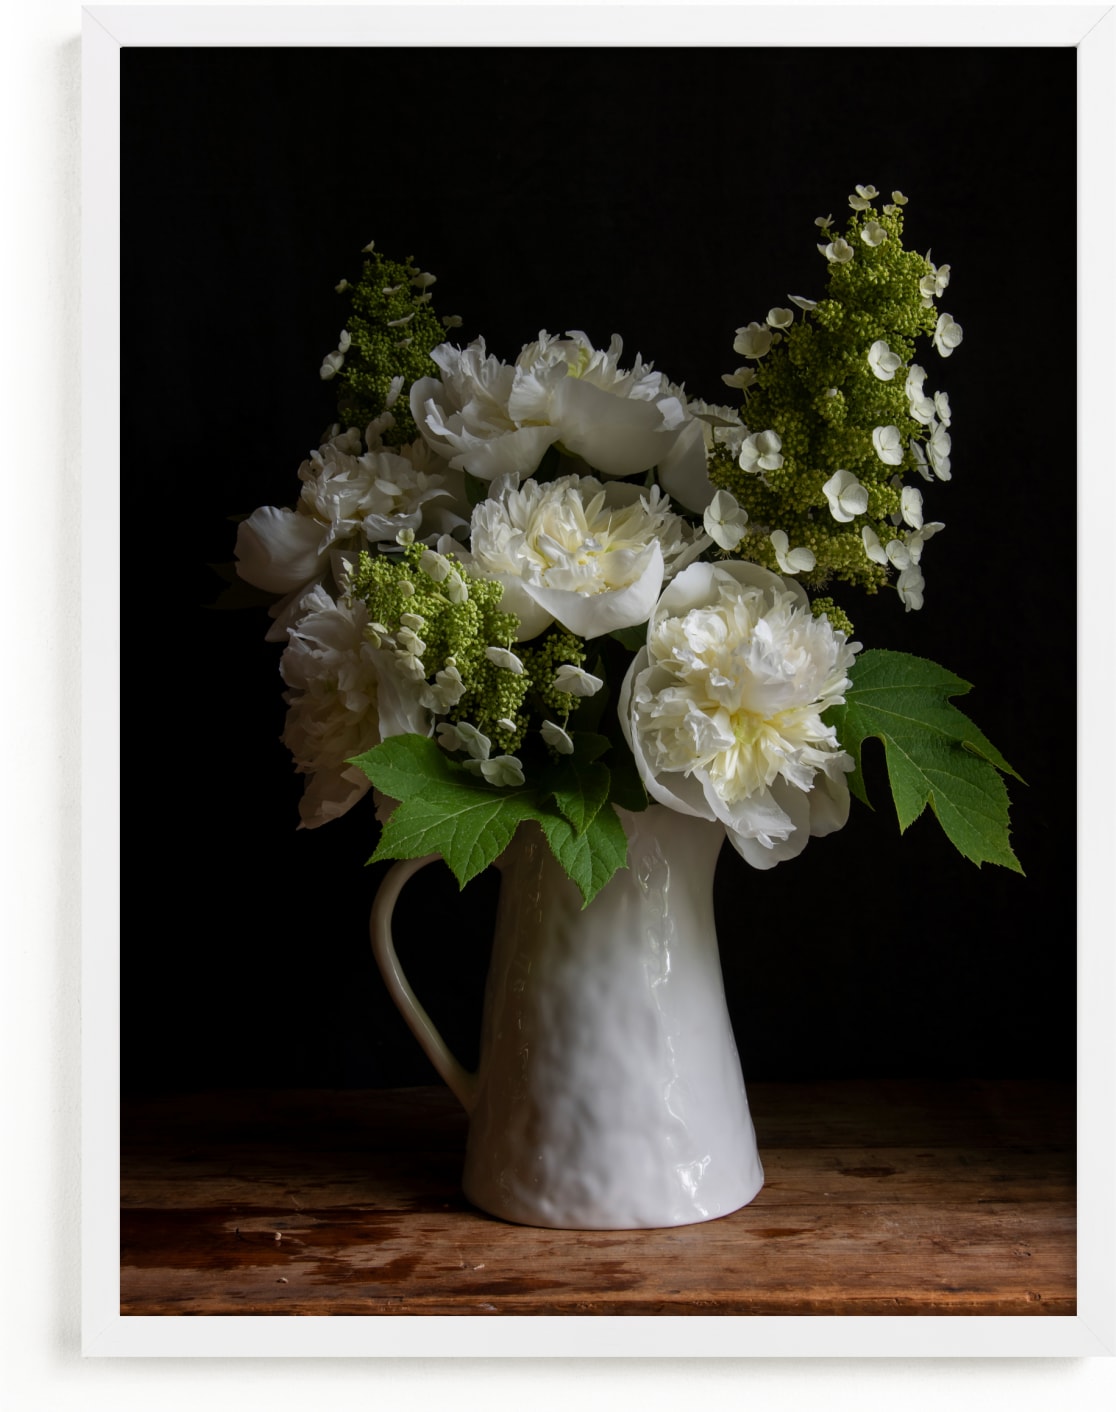 This is a white art by Elizabeth Pyle called Pitcher of Peonies.